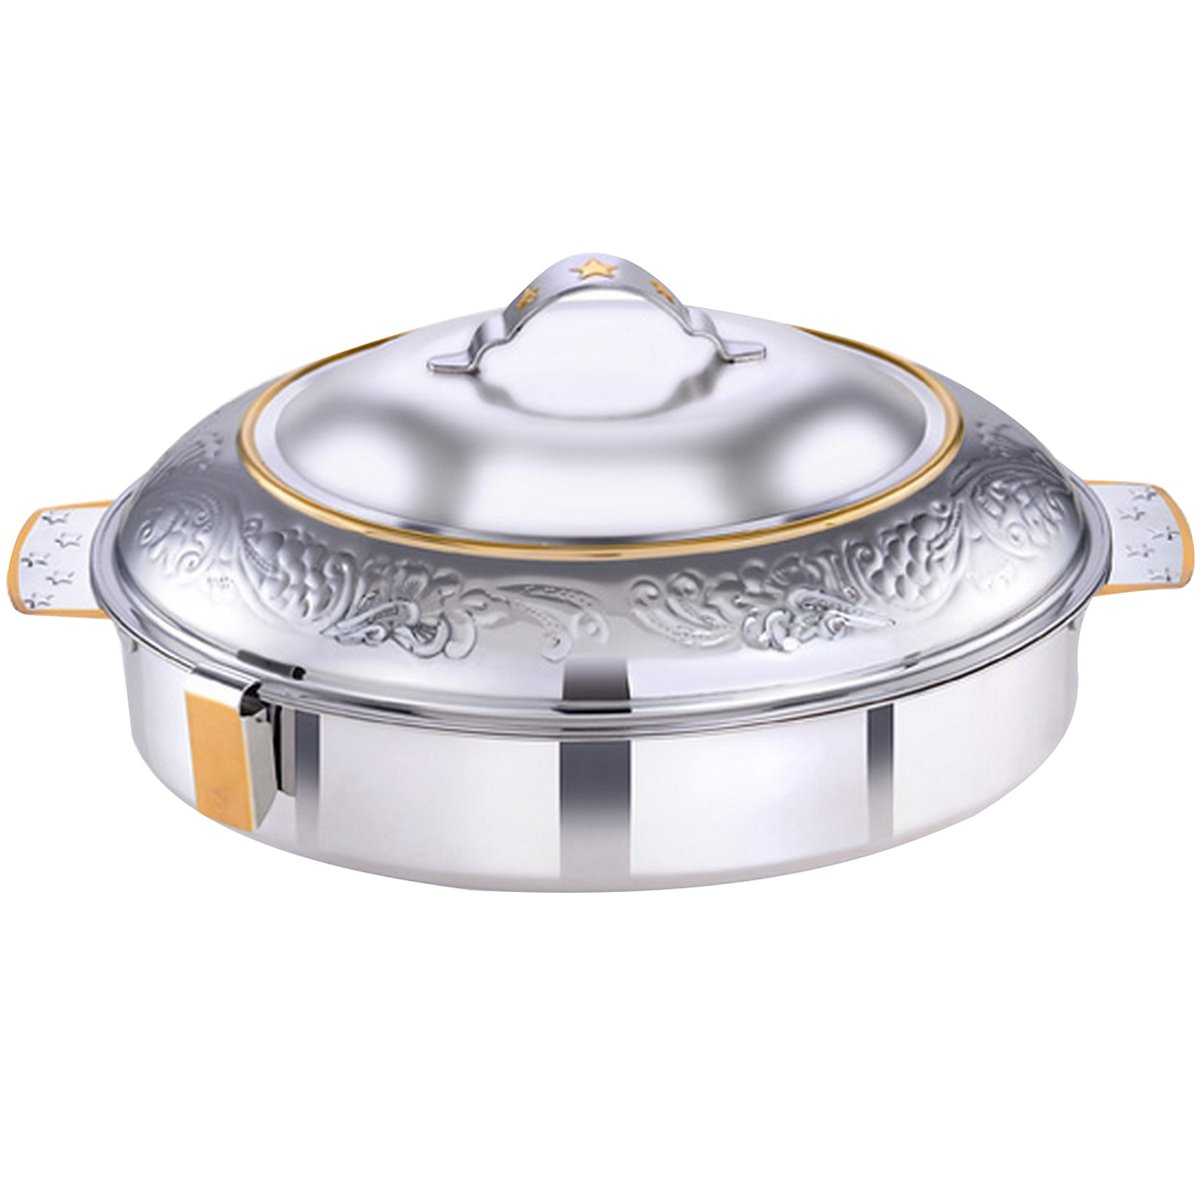 Rathore Stainless Steel Hot Pot Zara Dome Oval 5Ltr